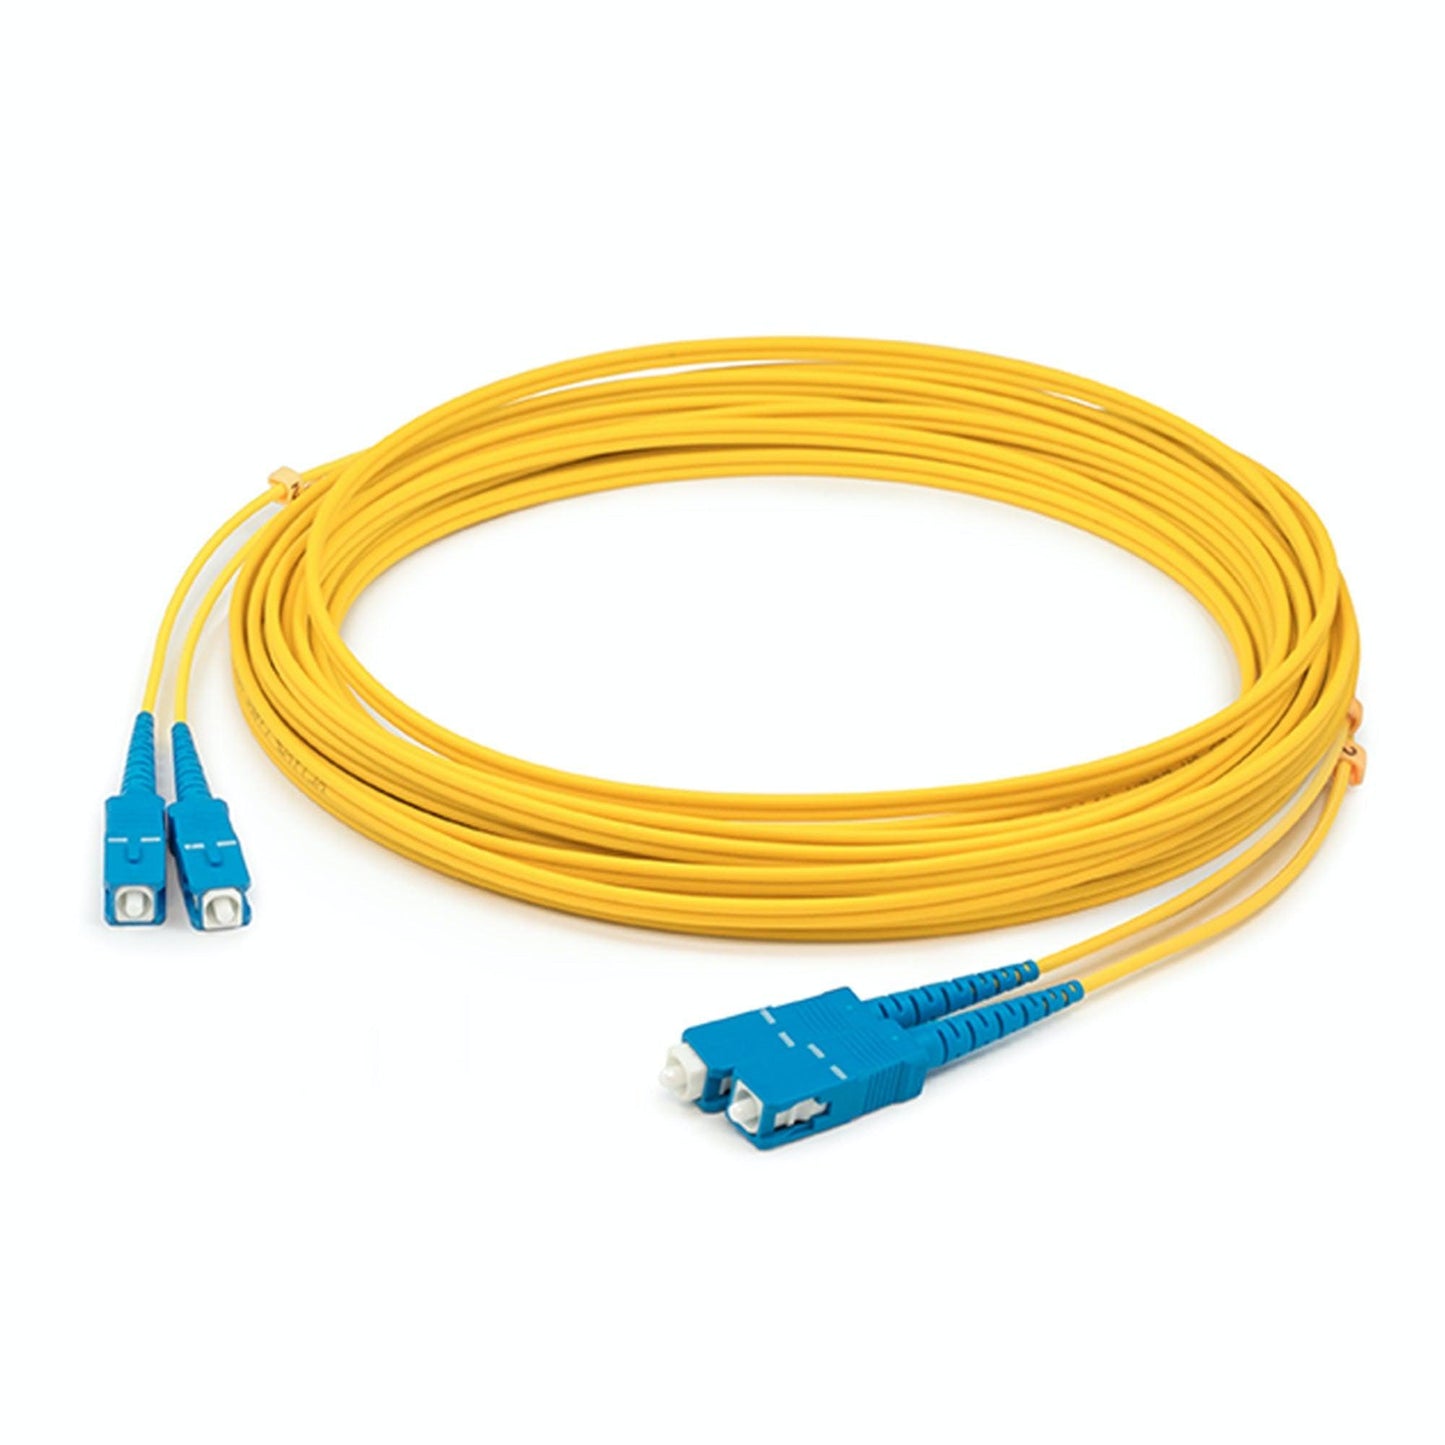 Addon Networks Add-Sc-Sc-3M5Om4-Yw Fibre Optic Cable 3 M 2X Sc Lomm Om4 Yellow